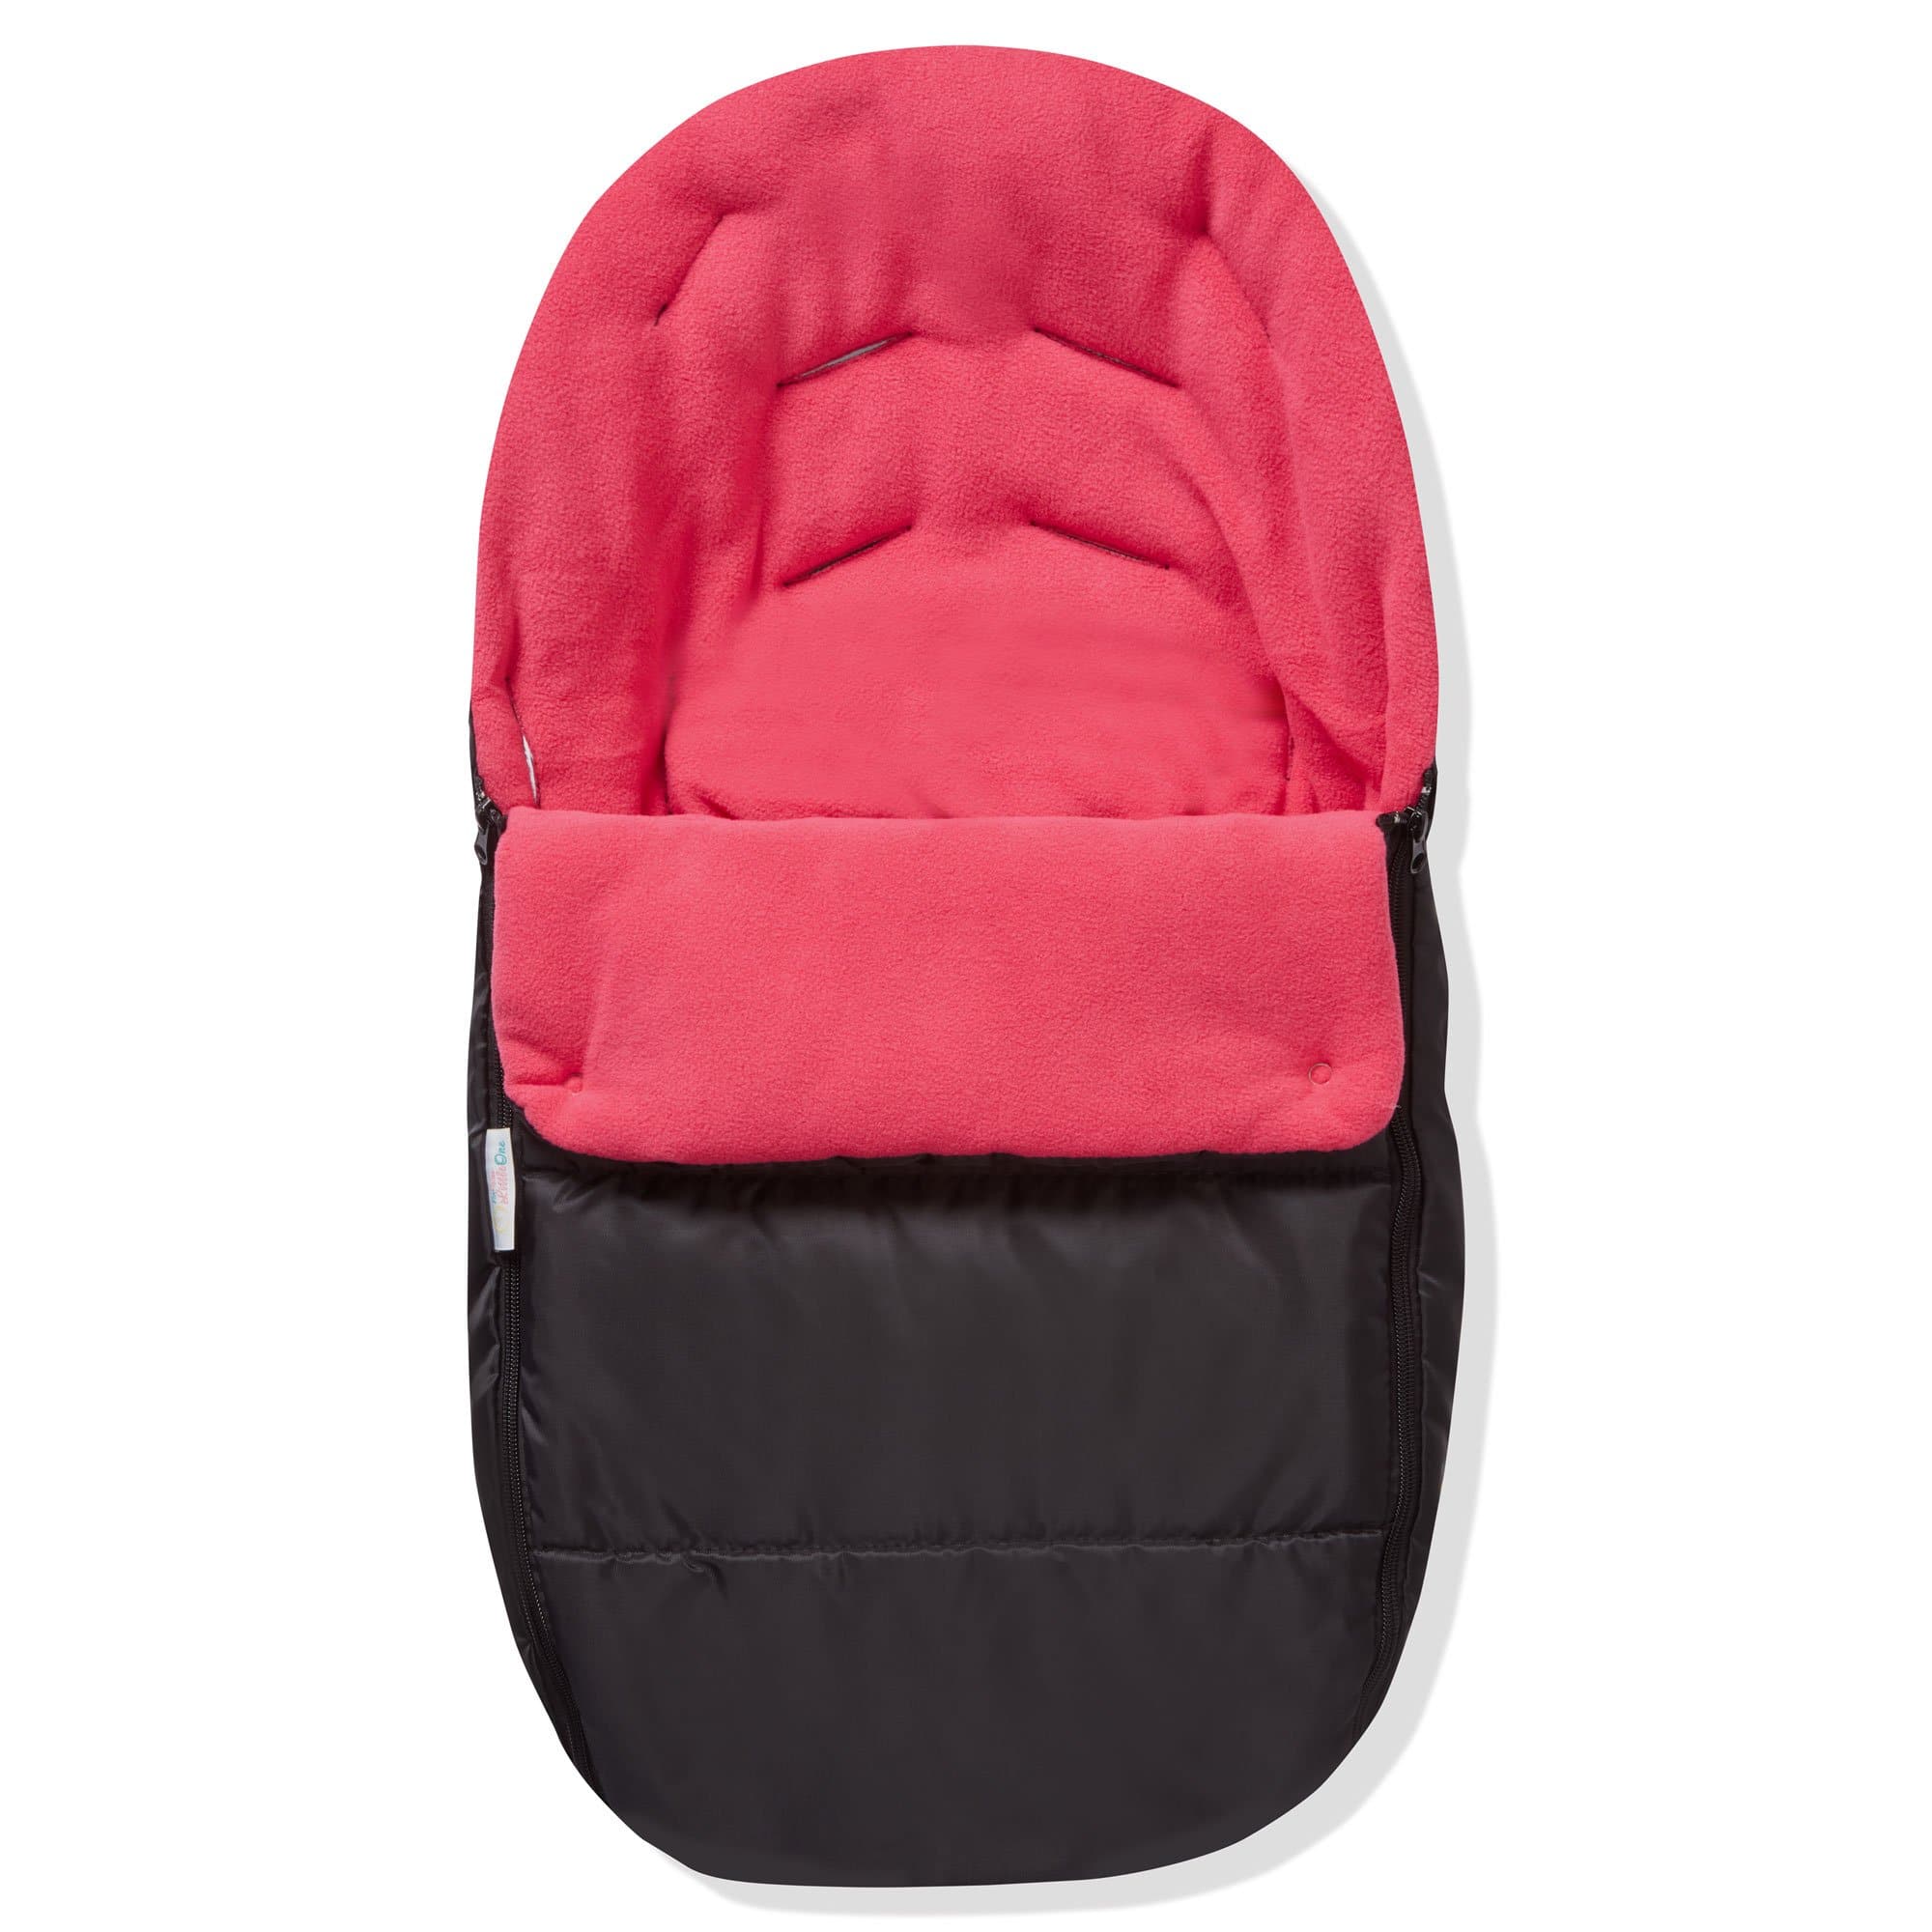 Premium Car Seat Footmuff / Cosy Toes Compatible with Cybex - Pink Rose / Fits All Models | For Your Little One